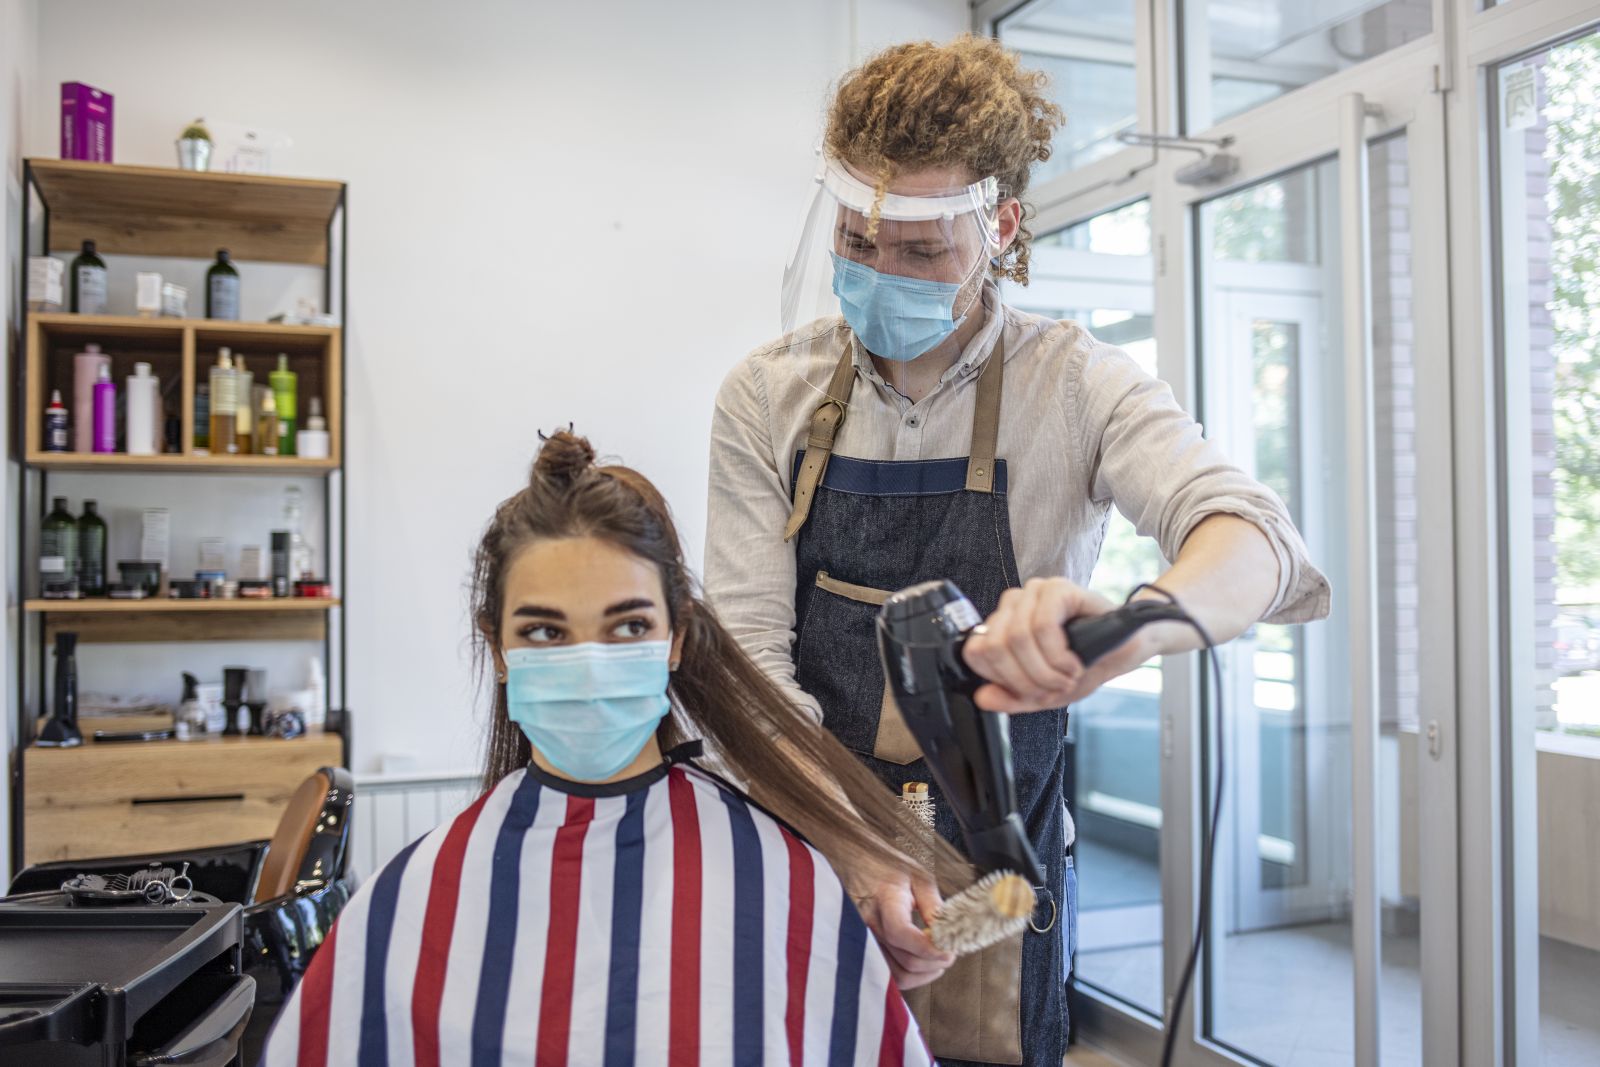 Hairdresser blow-drying customer's long hair during COVID